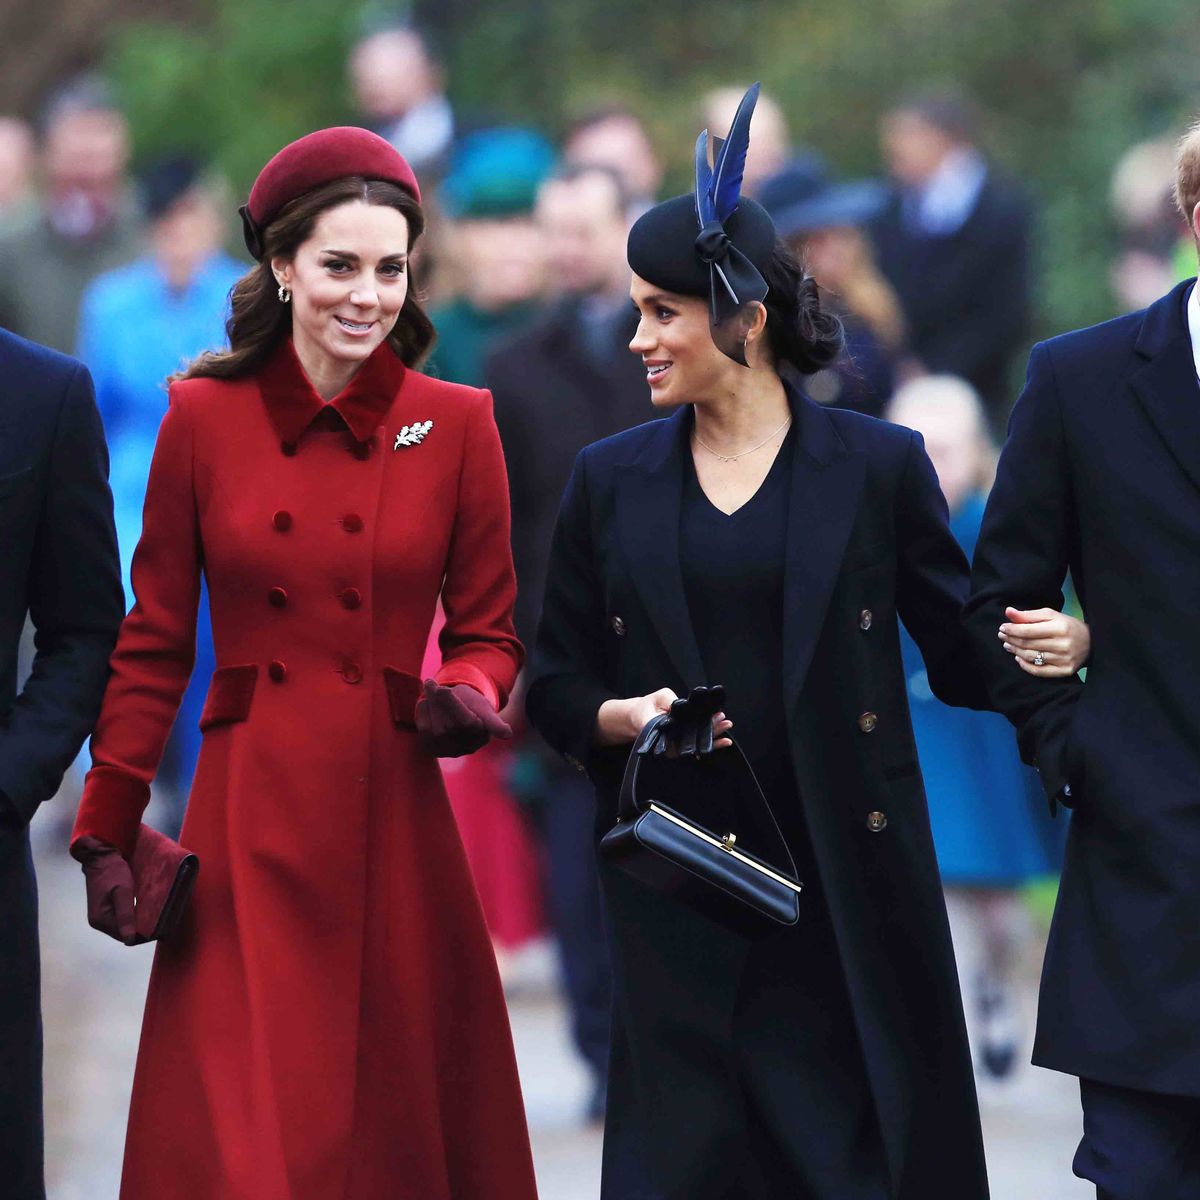 Meghan Markle and Kate Middleton Wear Matching Outfits Amid Feud Rumors ...